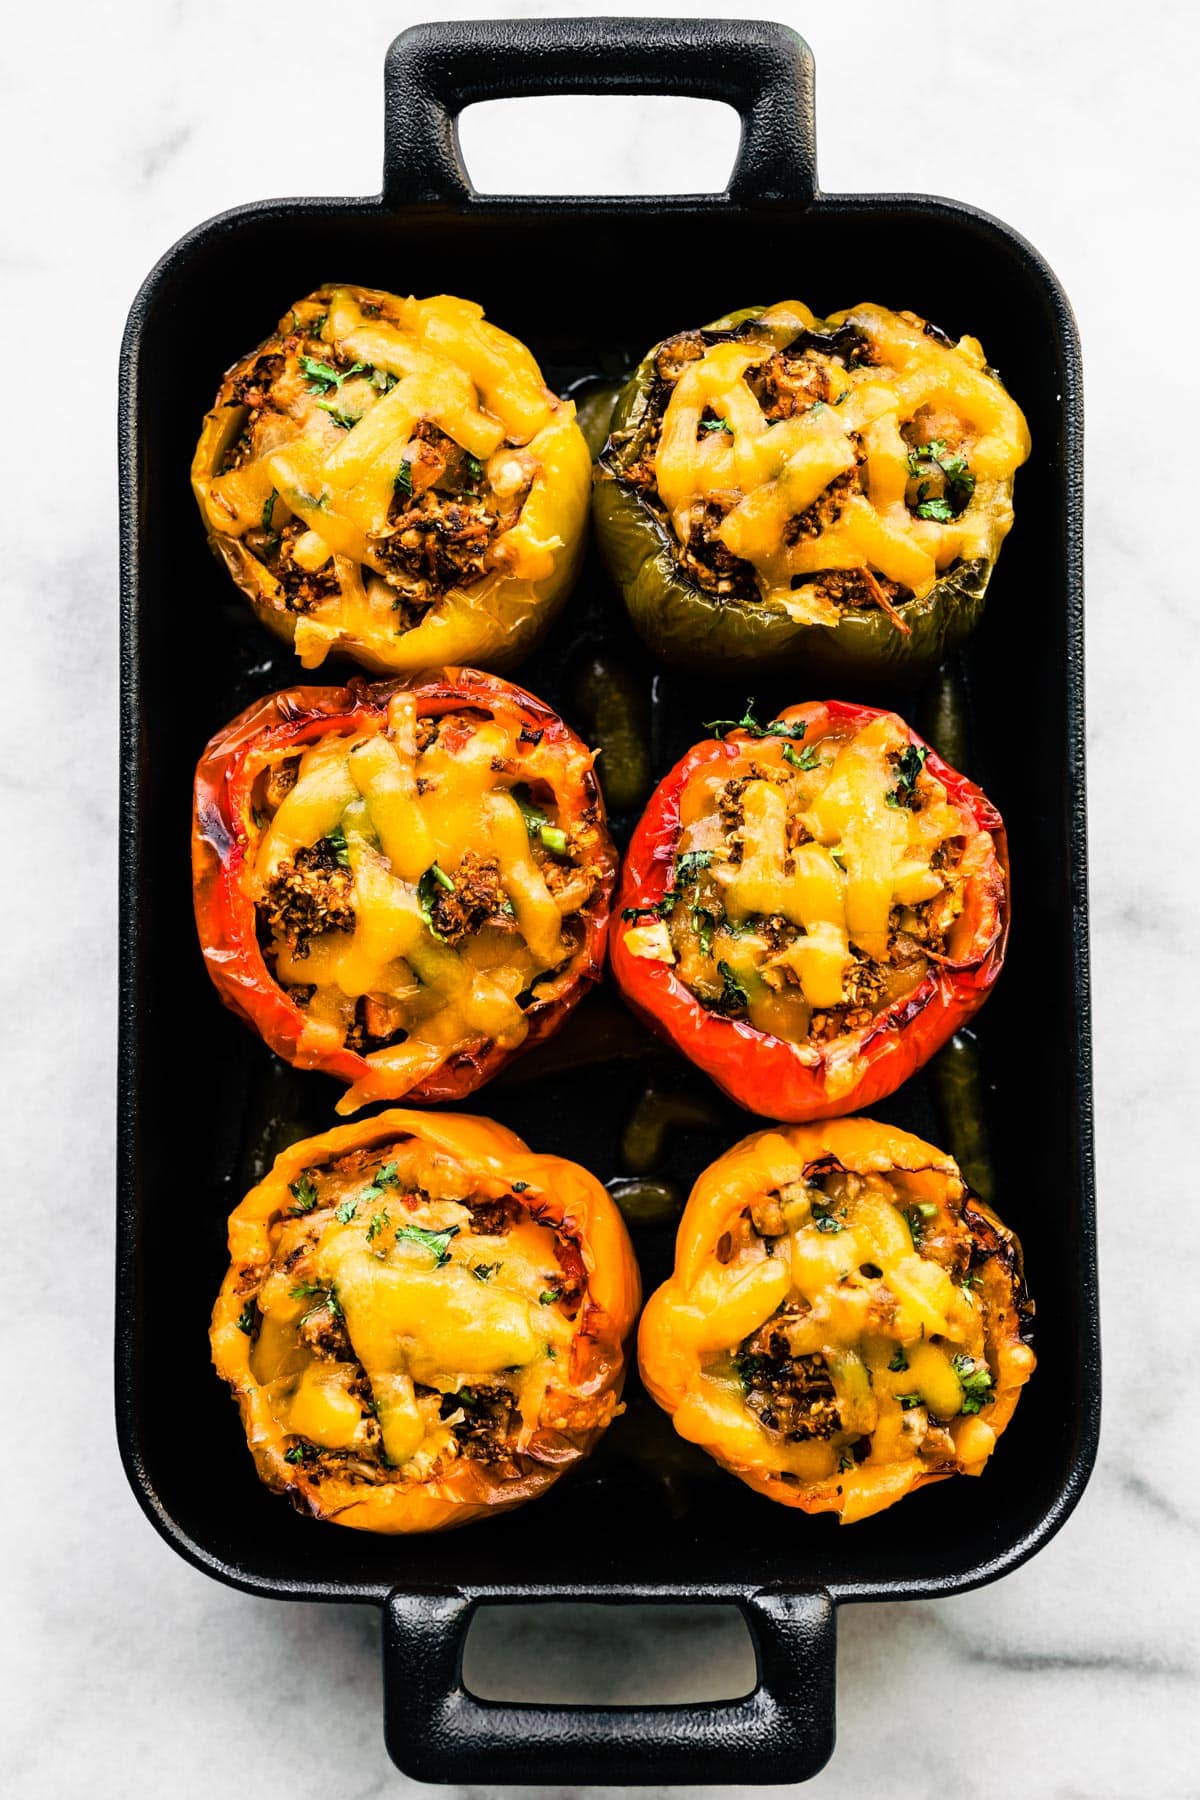 Overhead photo of six vegetarian stuffed bell peppers topped in a black casserole dish.